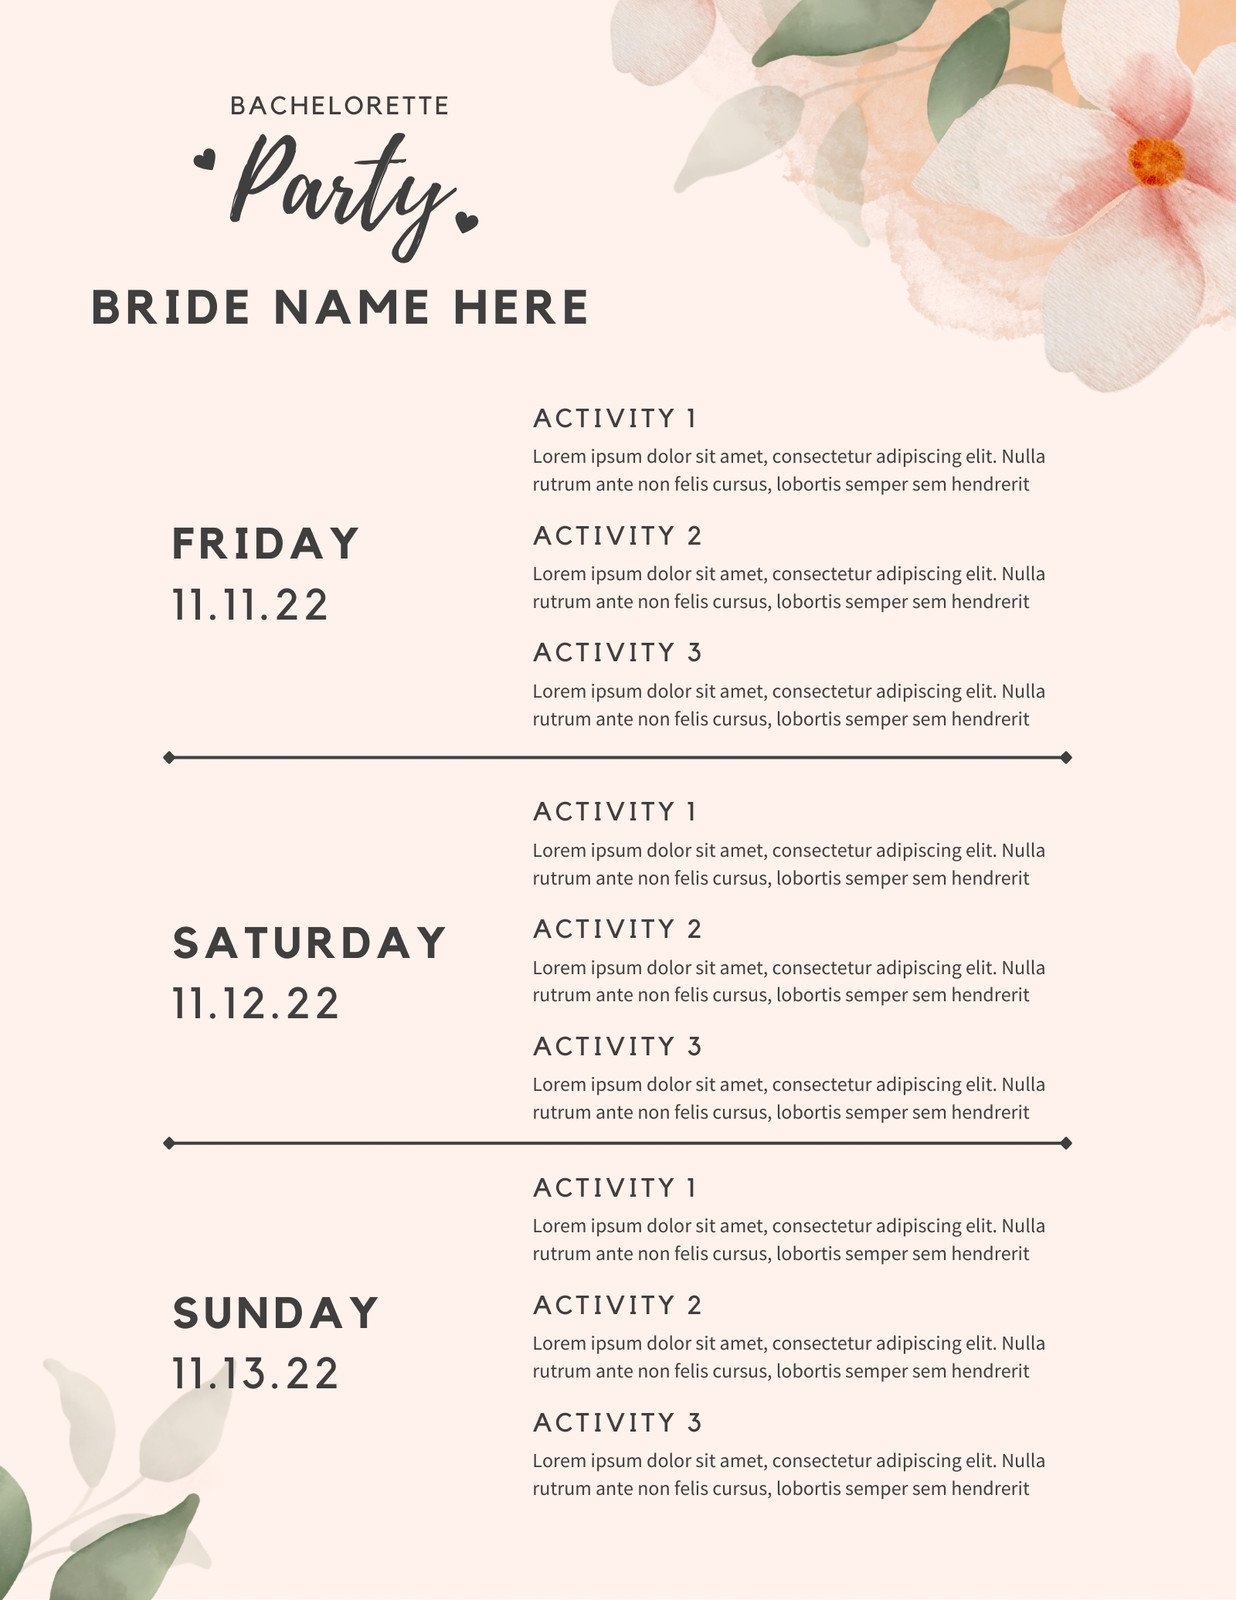 FREE Bridal Shower Itinerary Template: Plan Your Perfect Shower With Ease